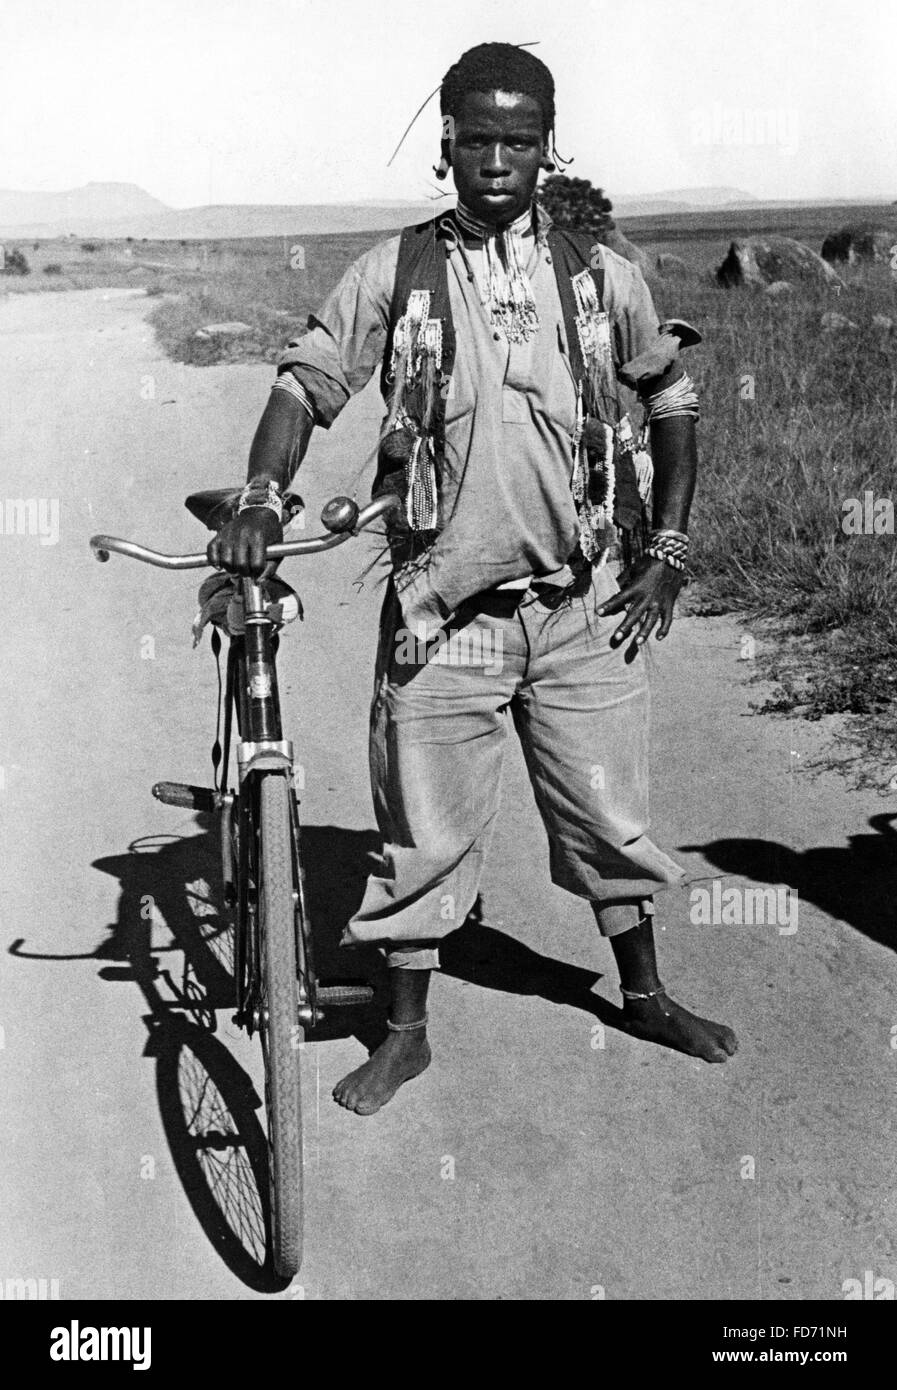 Zulu with a bicycle in South Africa, 1938 Stock Photo